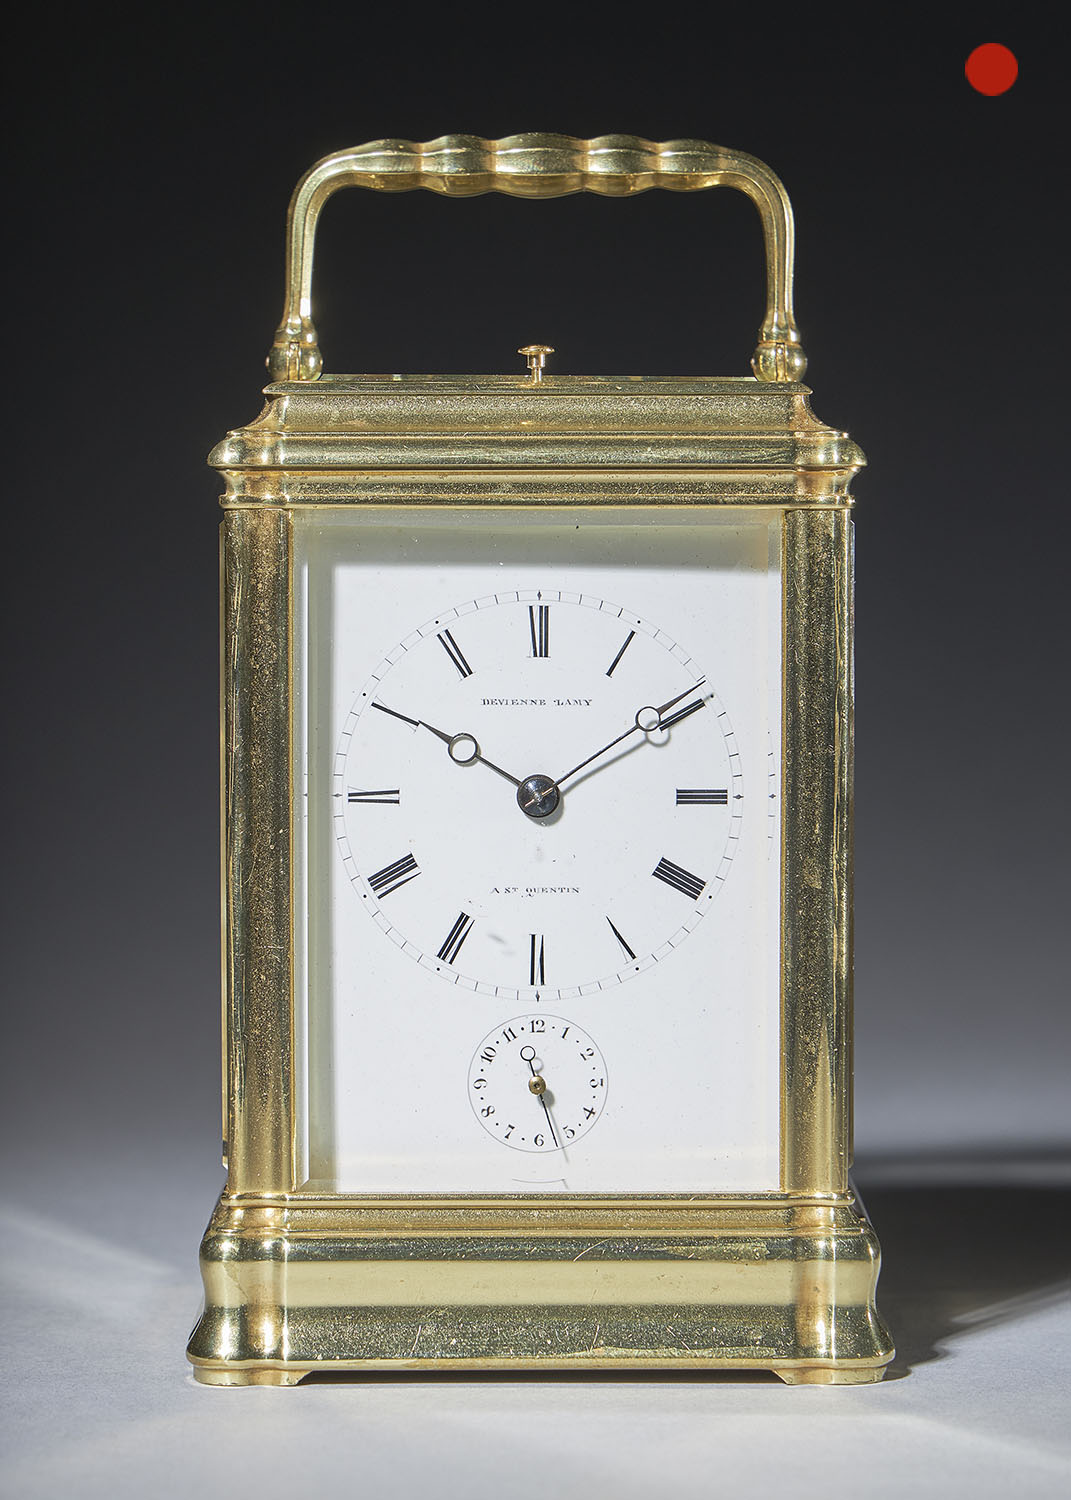 A Rare And Unusual 19th-Century Carriage Clock Signed Devienne Lamy A St Quentin, Circa: 1860 1